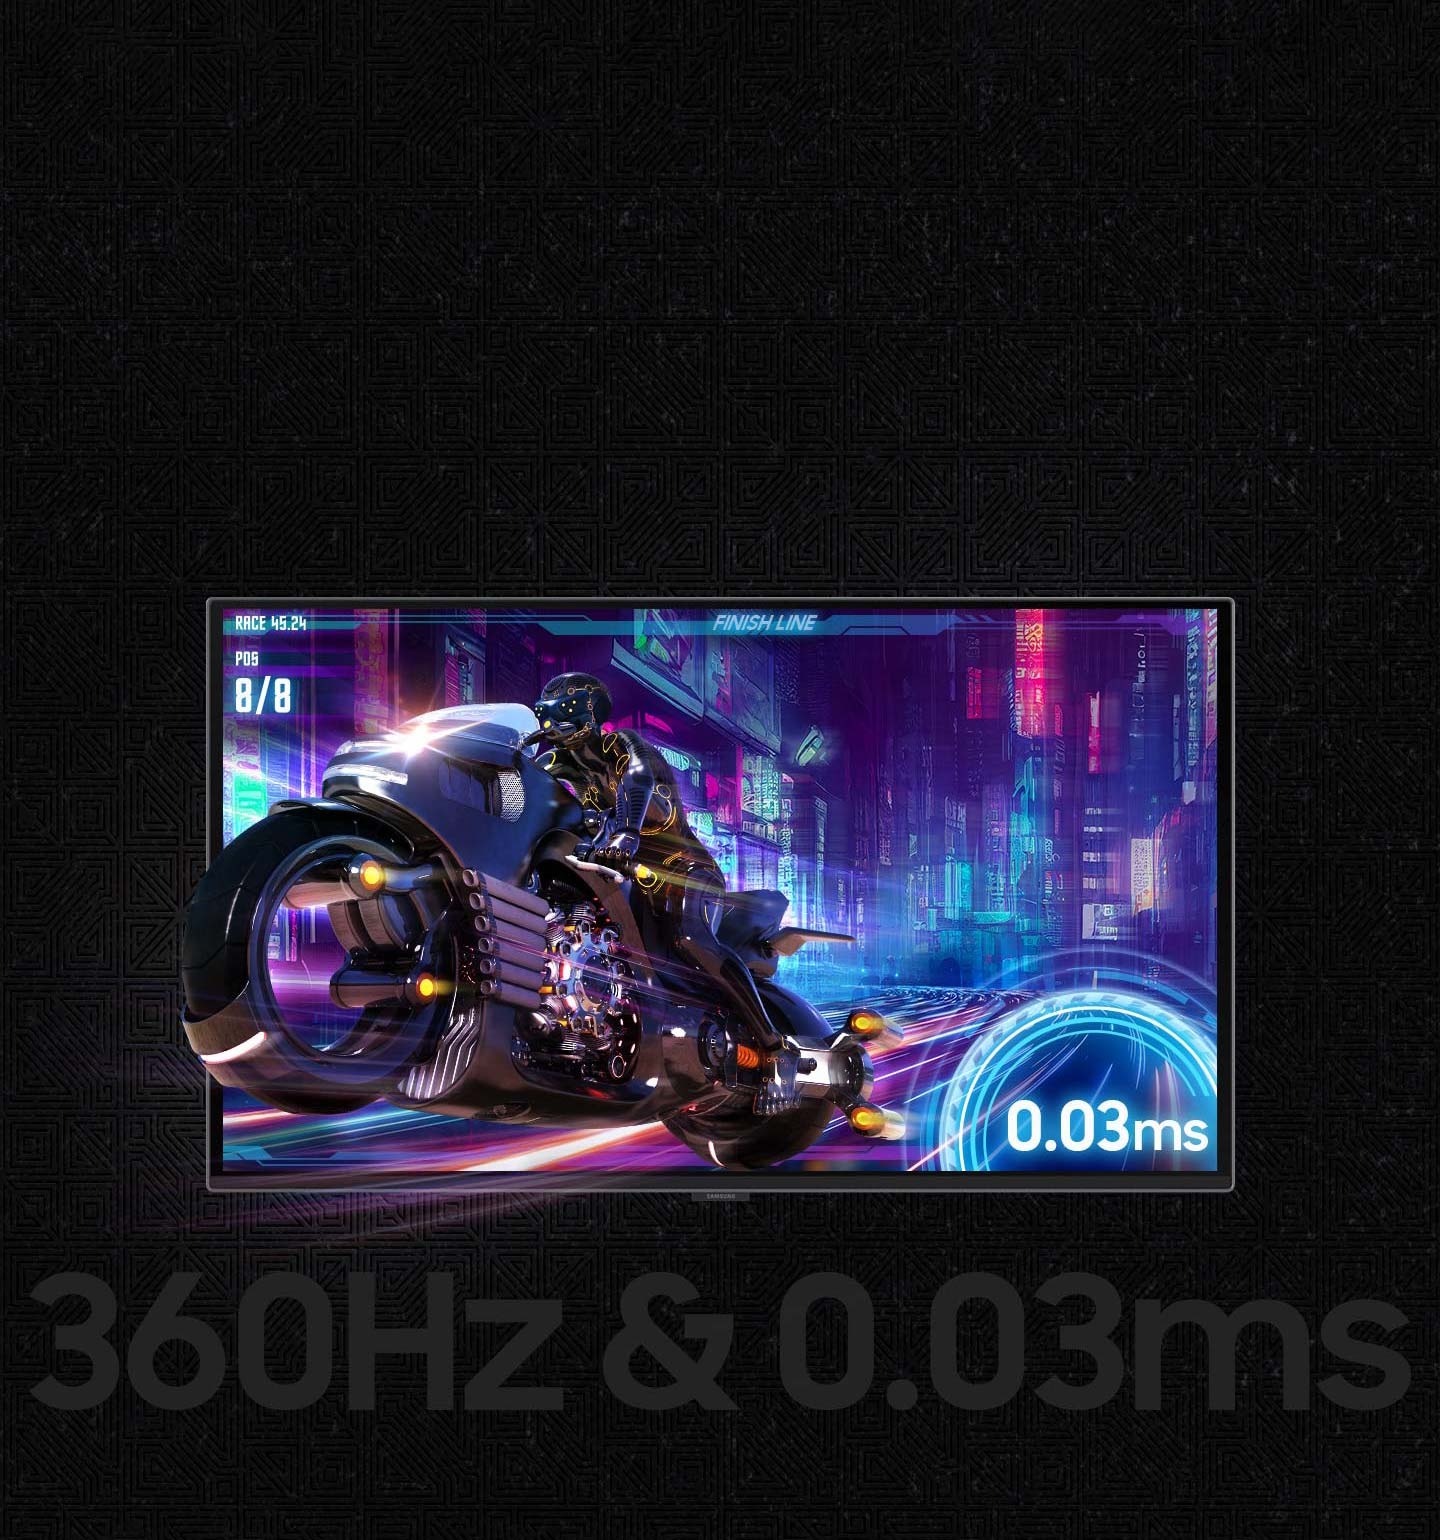 A futuristic motorcycle is coming out of a screen. ON the screen, a refresh rate of .03ms is labeled. Below the screen, it reads "360Hz & 0.03ms".